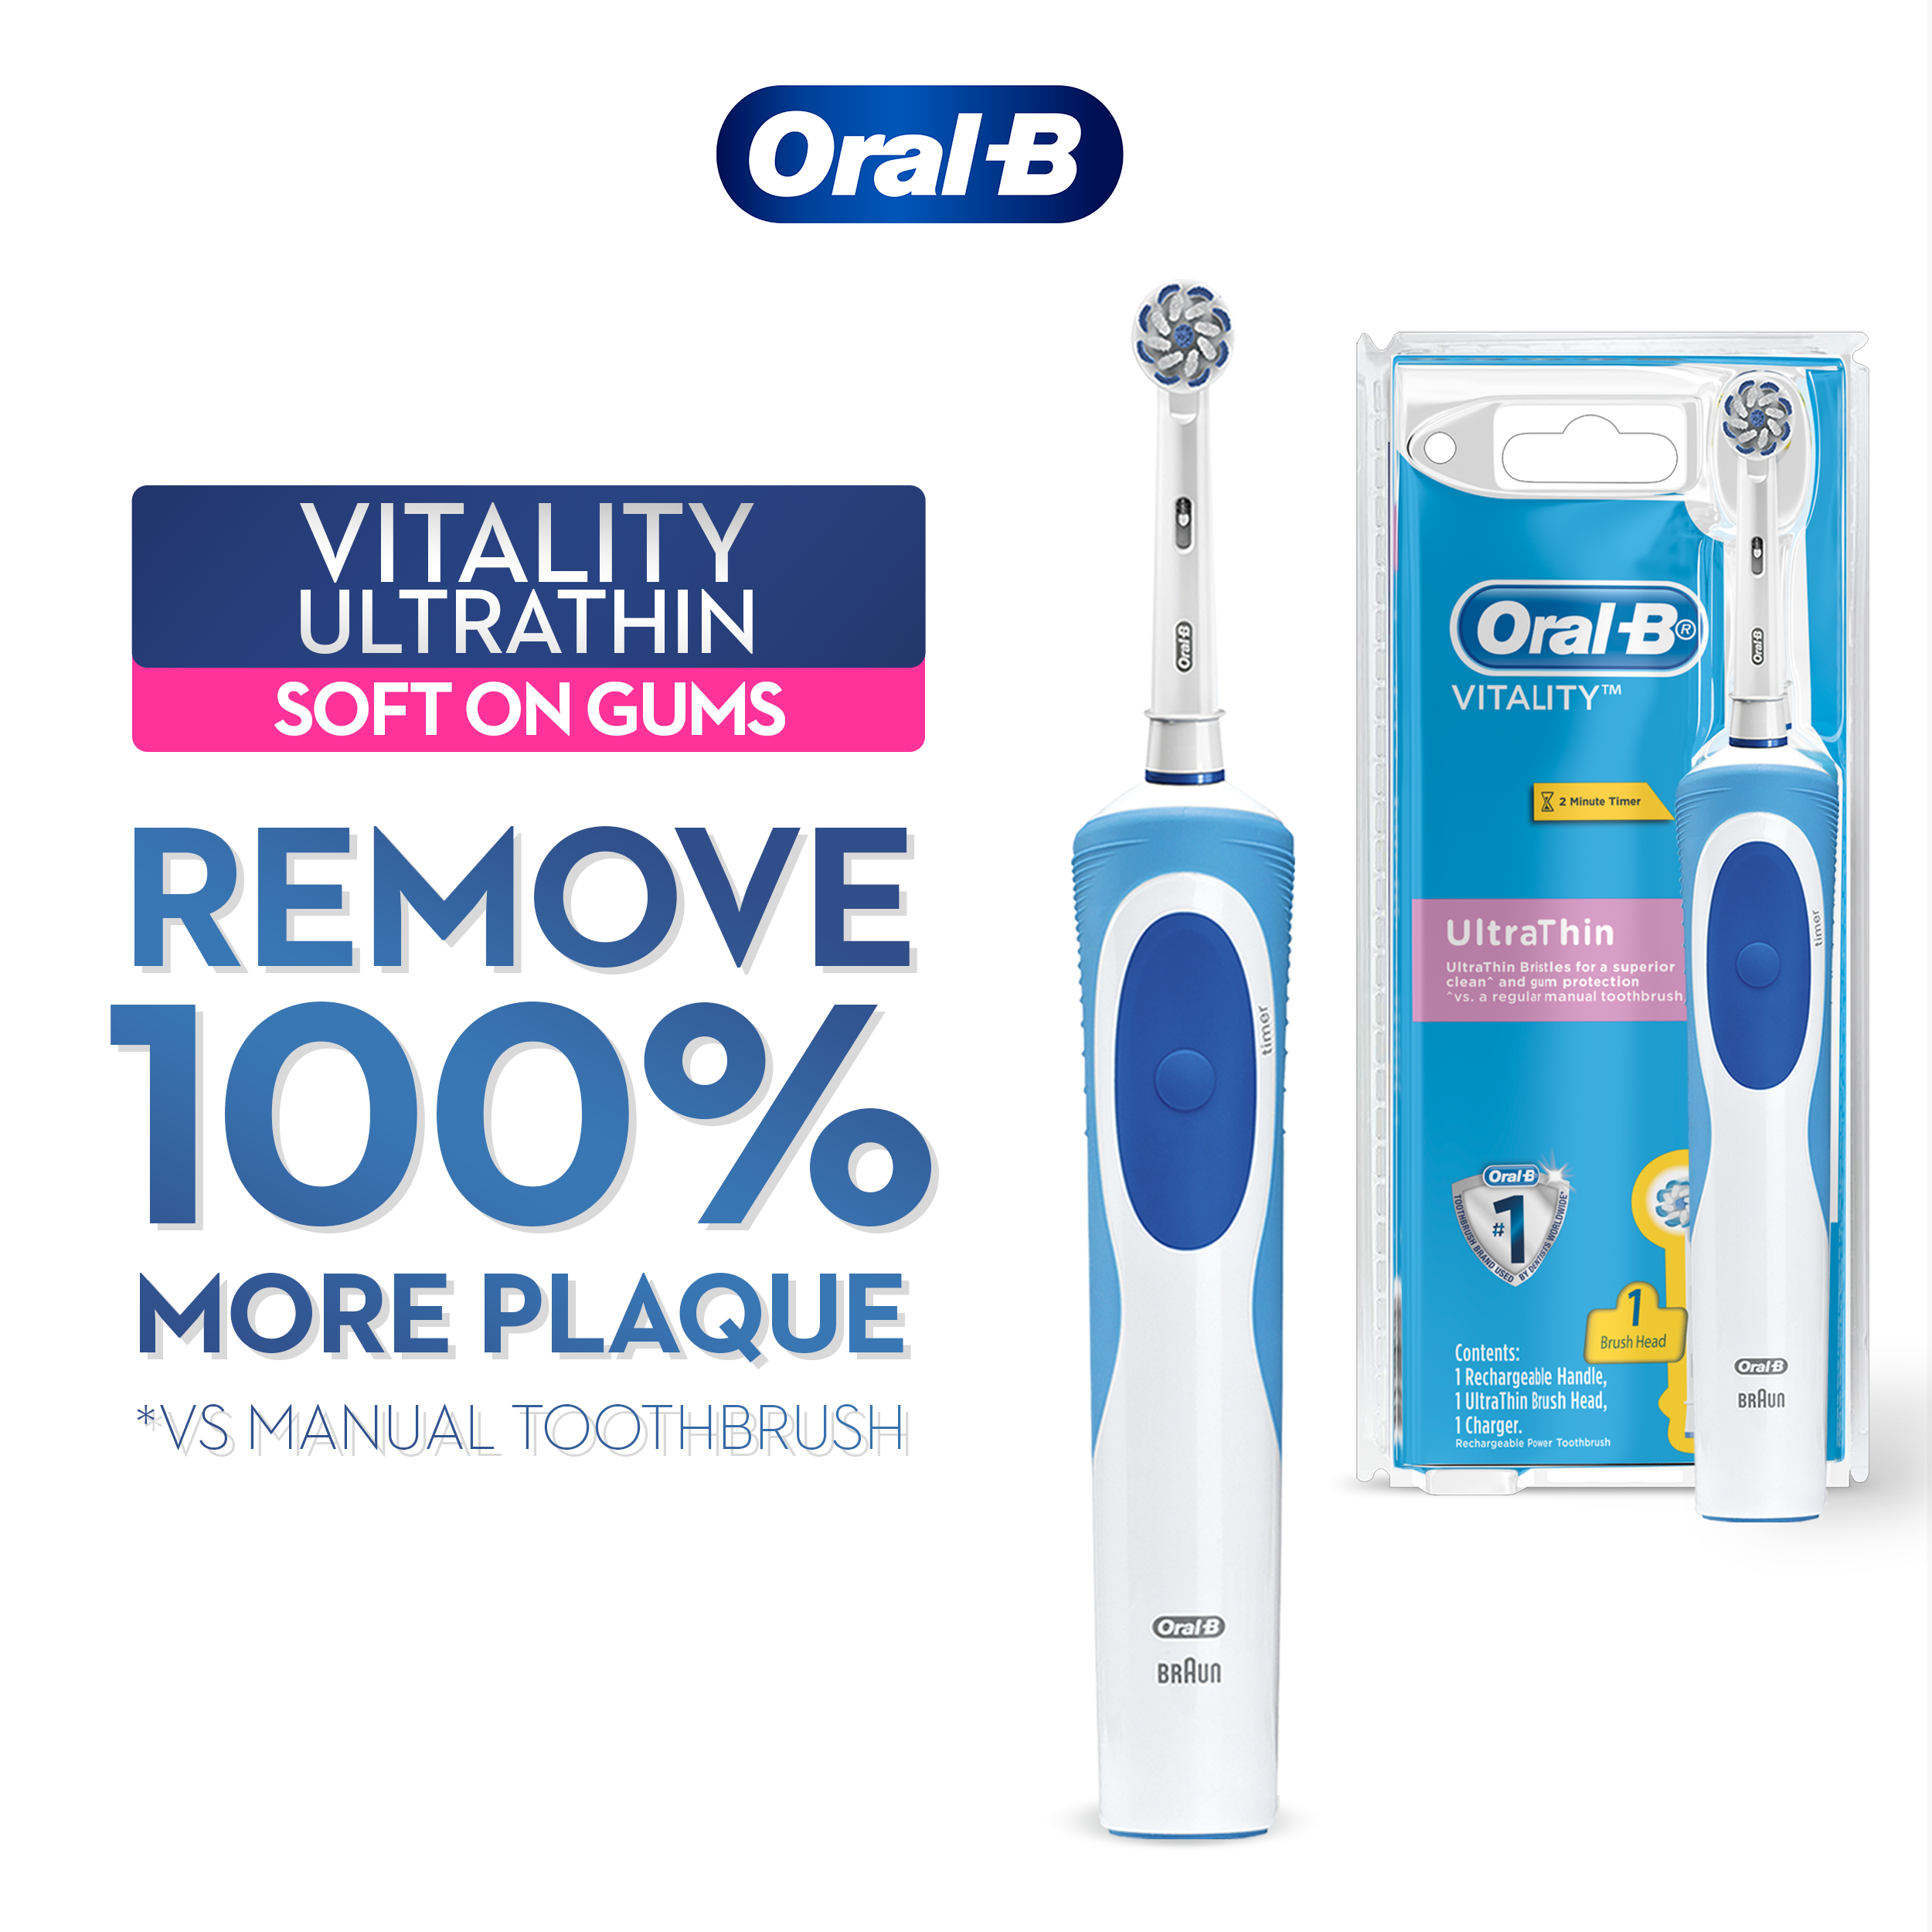 Oral-B Vitality Ultrathin Electric Toothbrush Handle Powered by Braun